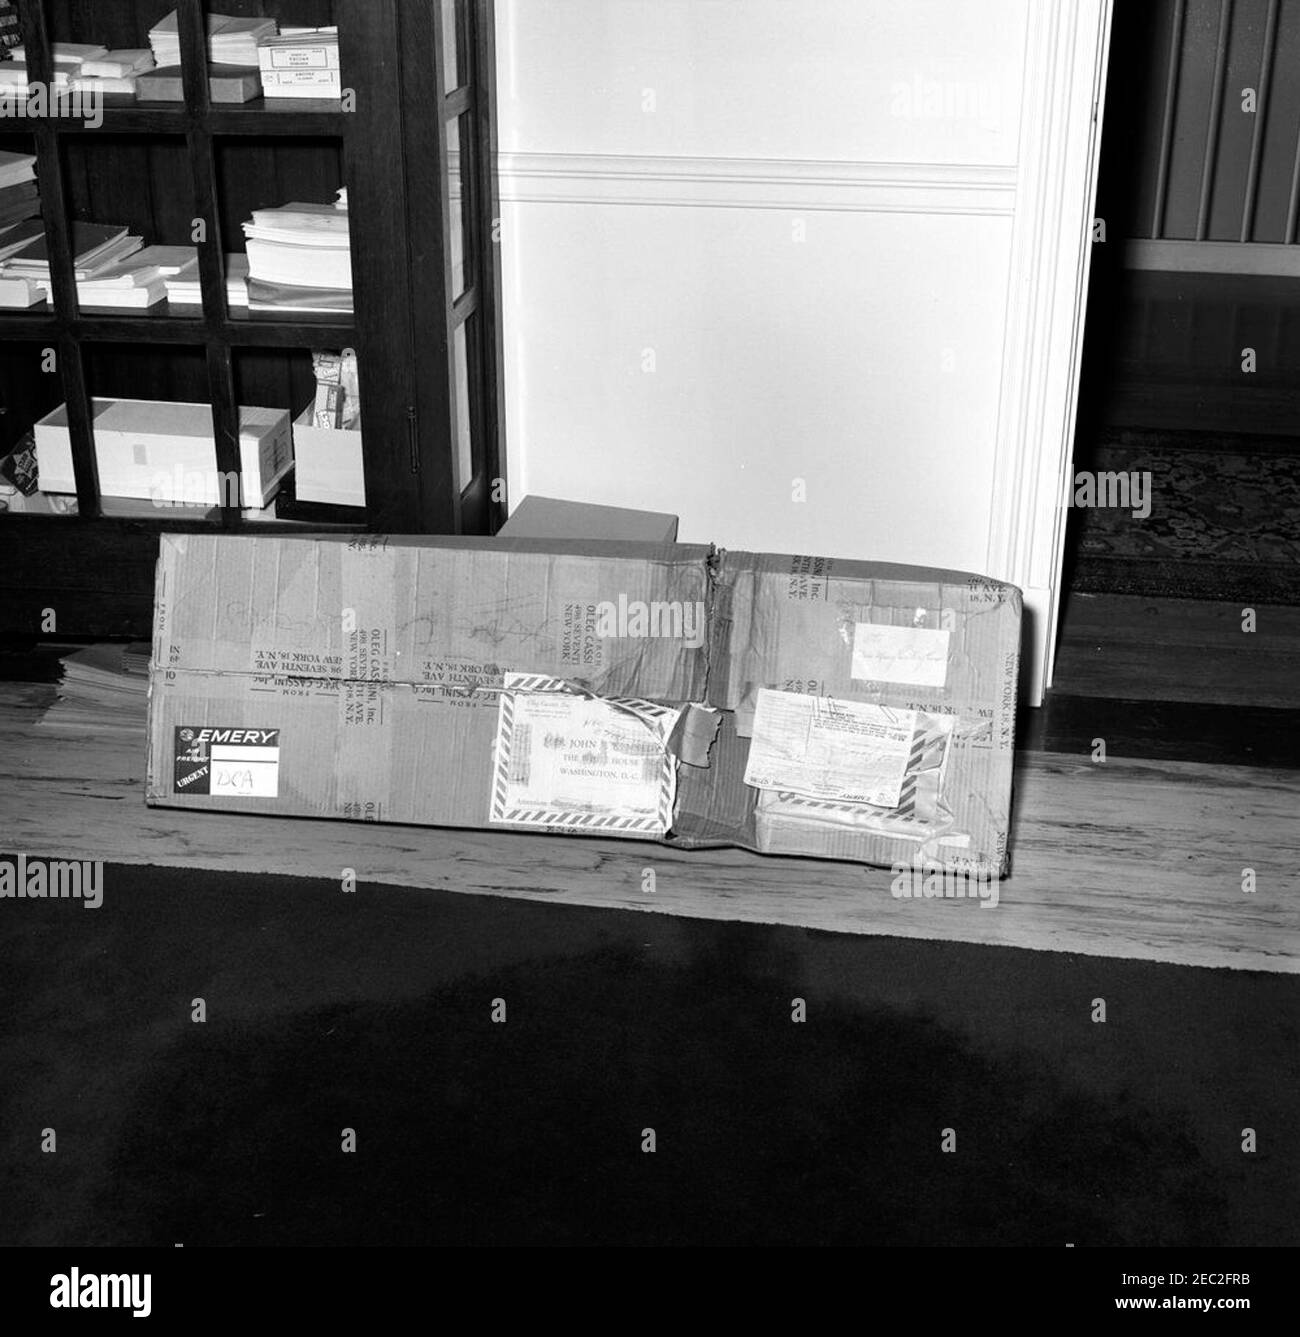 Damaged shipping carton u0026 dress for First Lady Jacqueline Kennedy (JBK). A damaged shipping carton from the fashion design company, Oleg Cassini, Inc., sits on the floor in the White House. Washington, D.C. Stock Photo